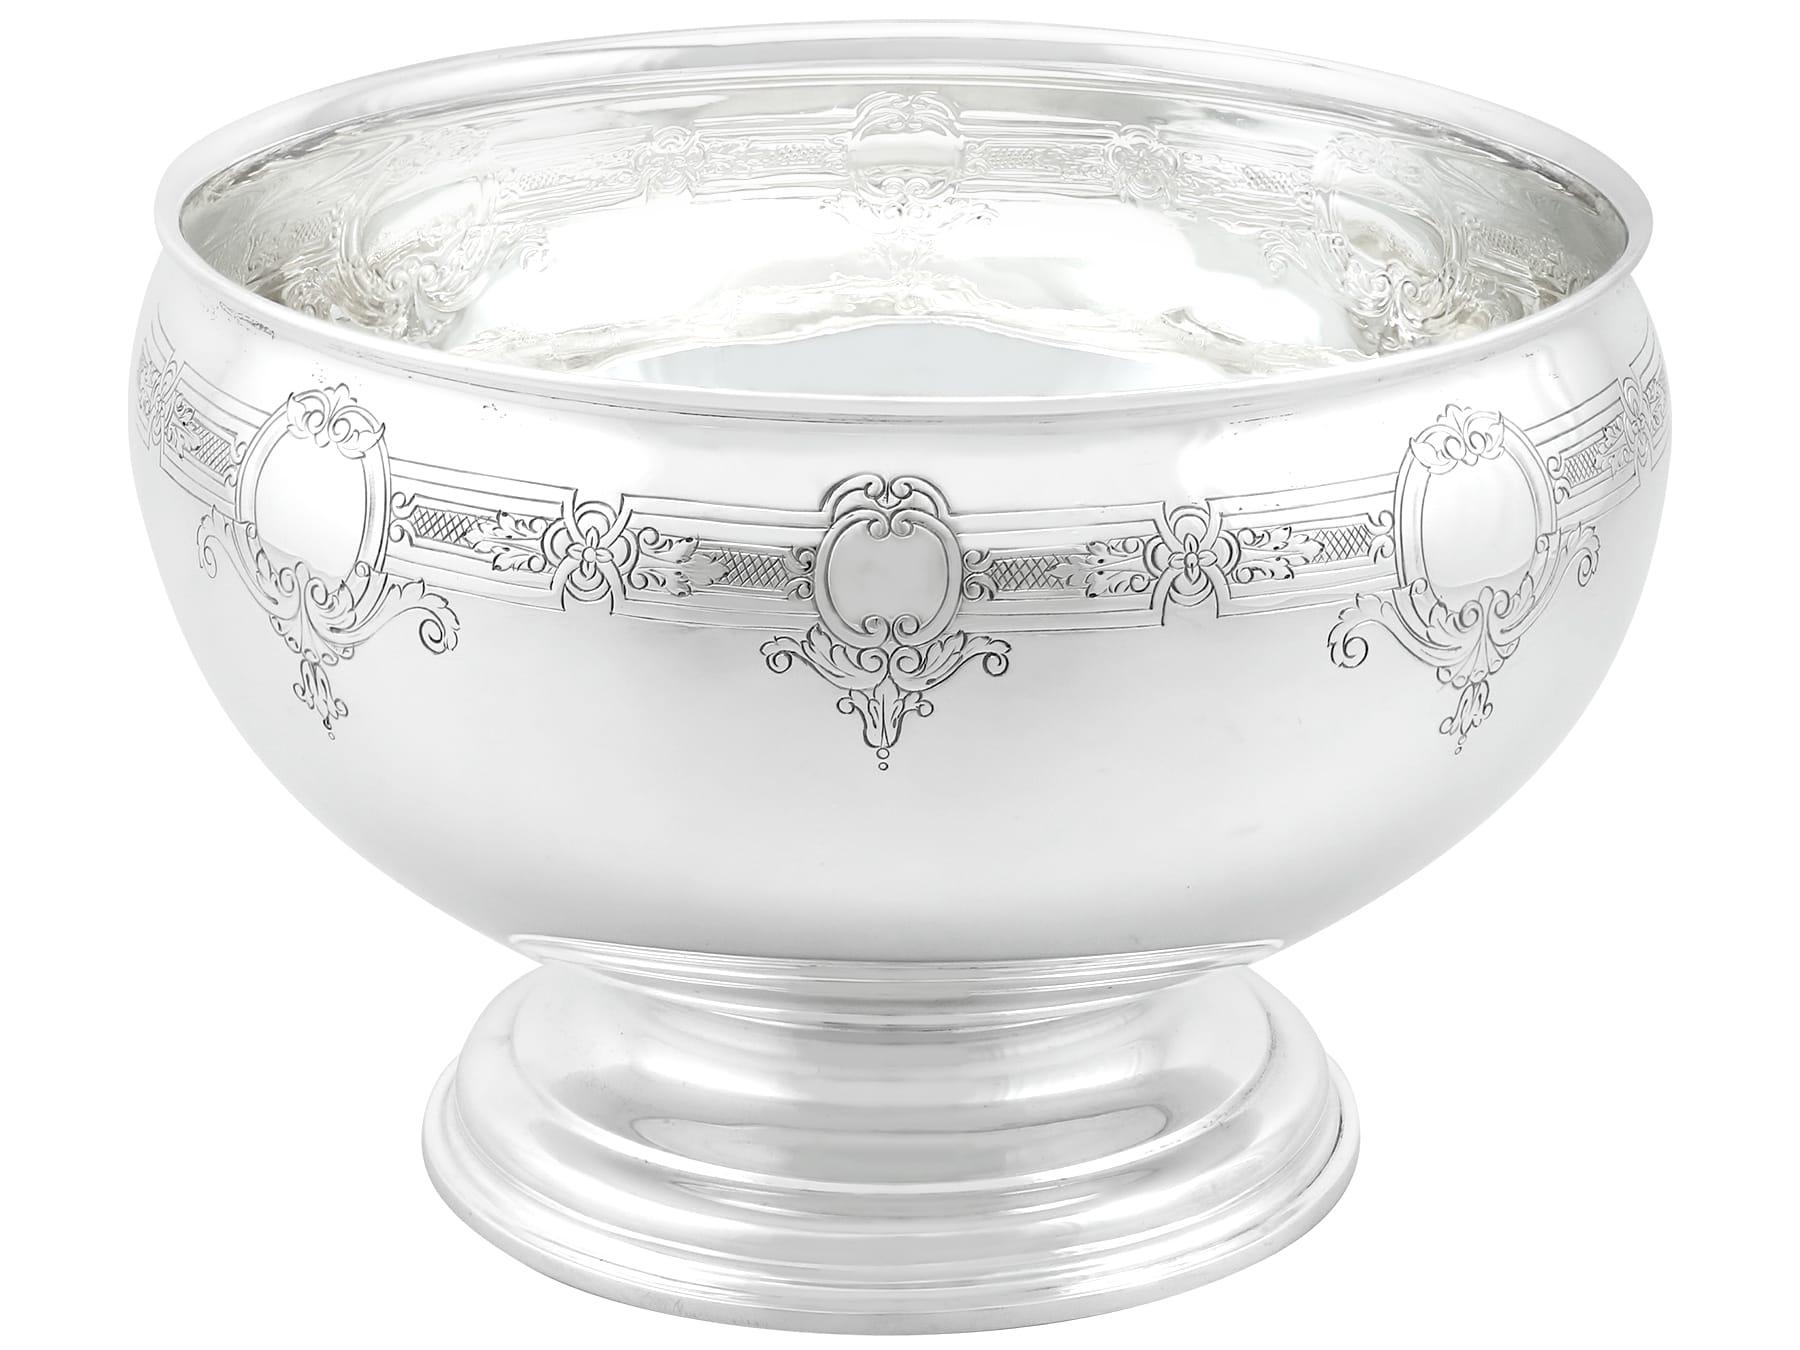 An exceptional, fine and impressive, antique George V English sterling silver presentation bowl; an addition to our ornamental silverware collection

This exceptional, fine and impressive antique George V sterling silver bowl has a circular